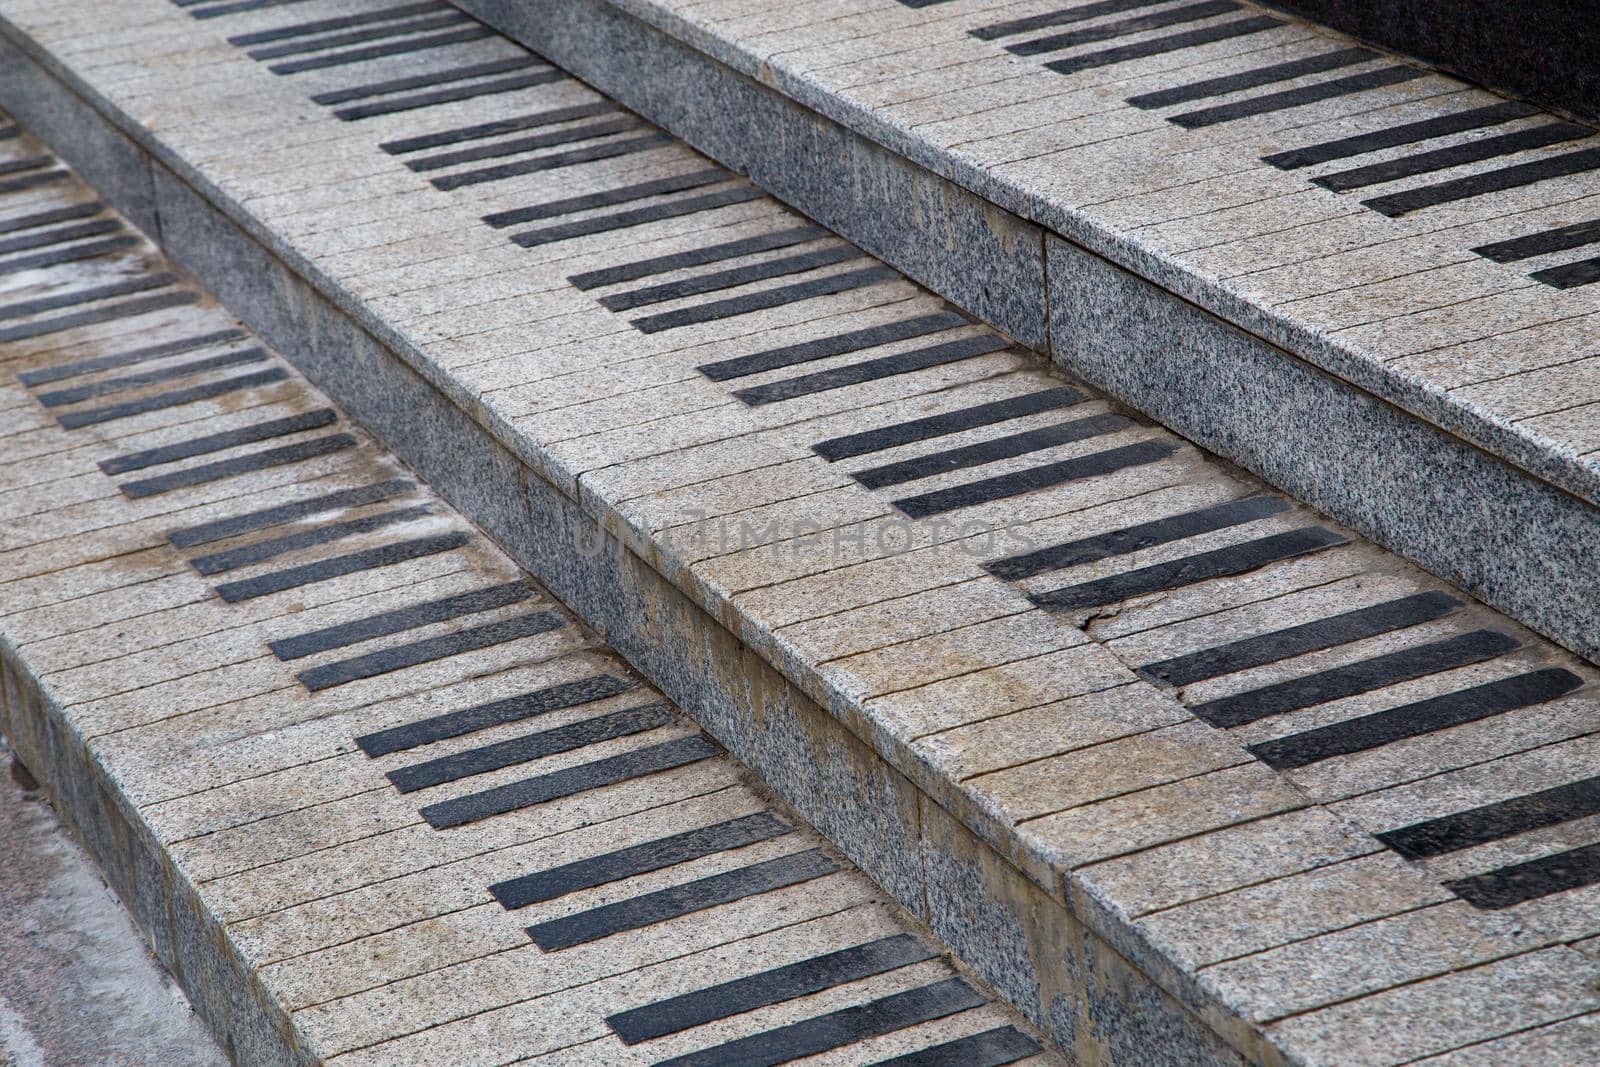 public granite stairs stylised as piano keys - close-up view by z1b